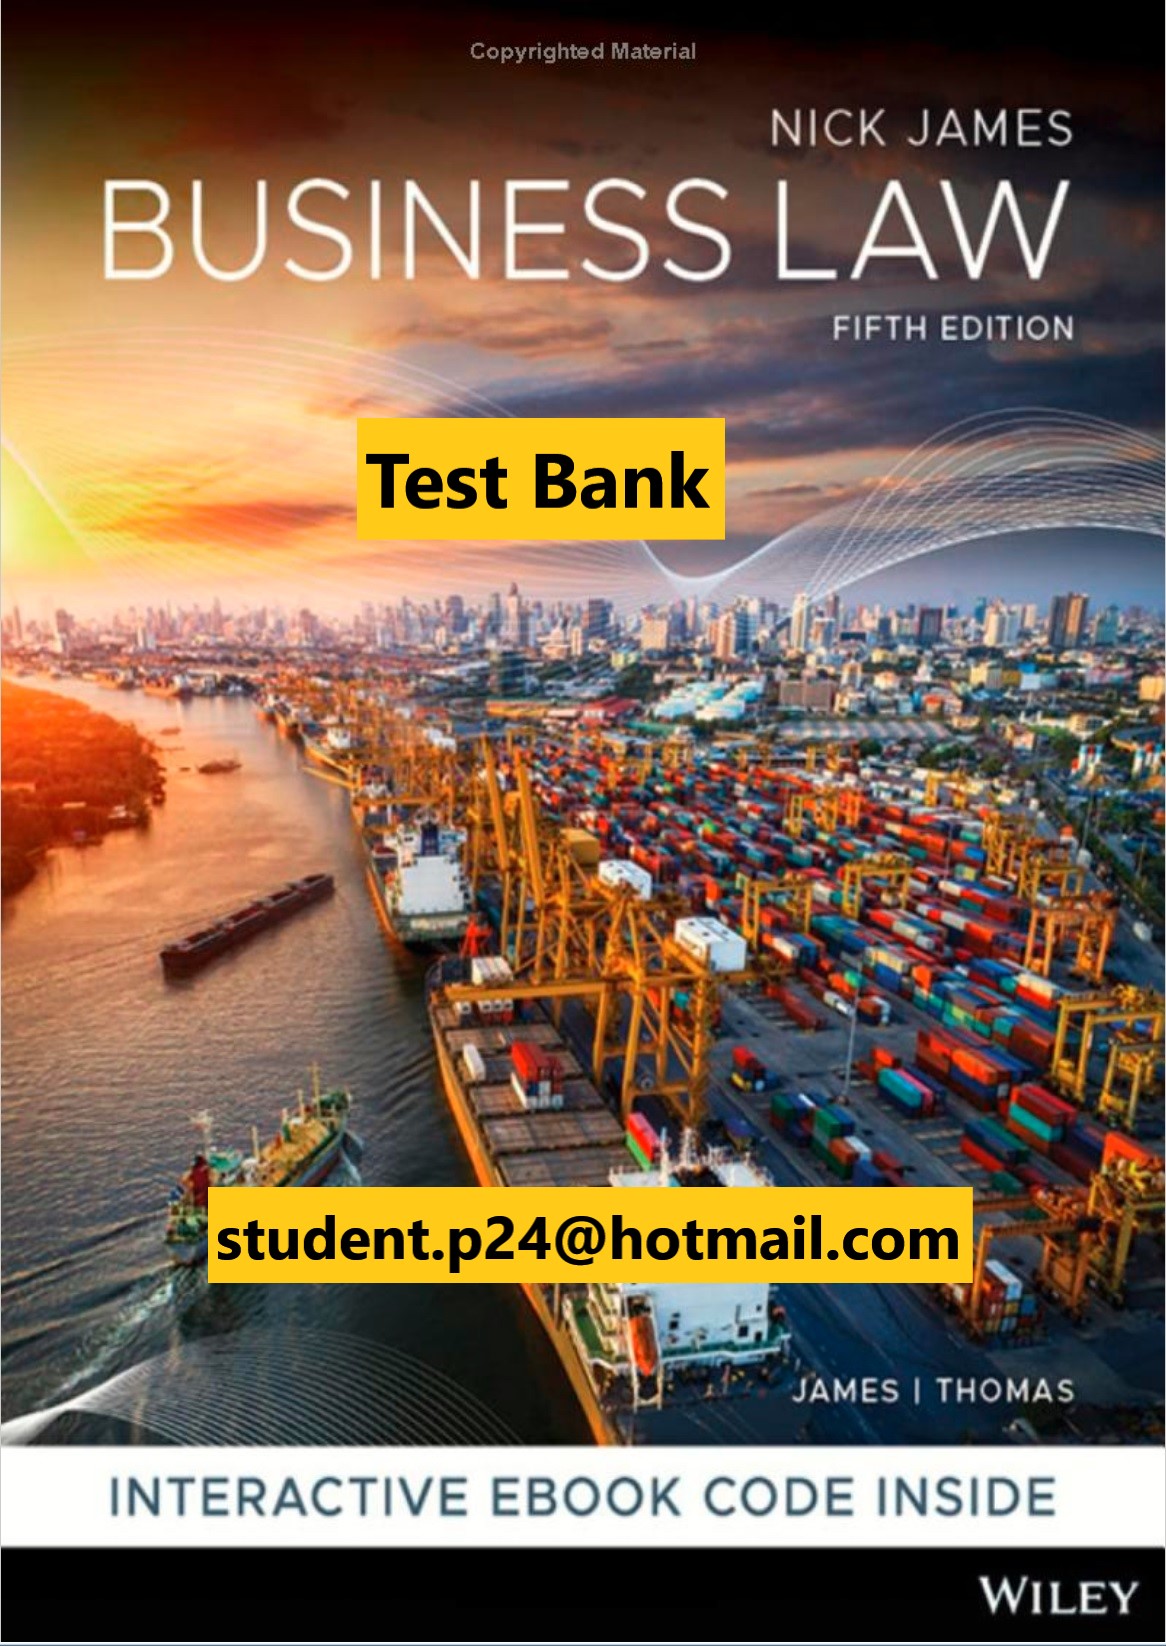 Business Law 5th Edition James Thomas 2020 AU Test Bank Instructor Resource Guide 1 1